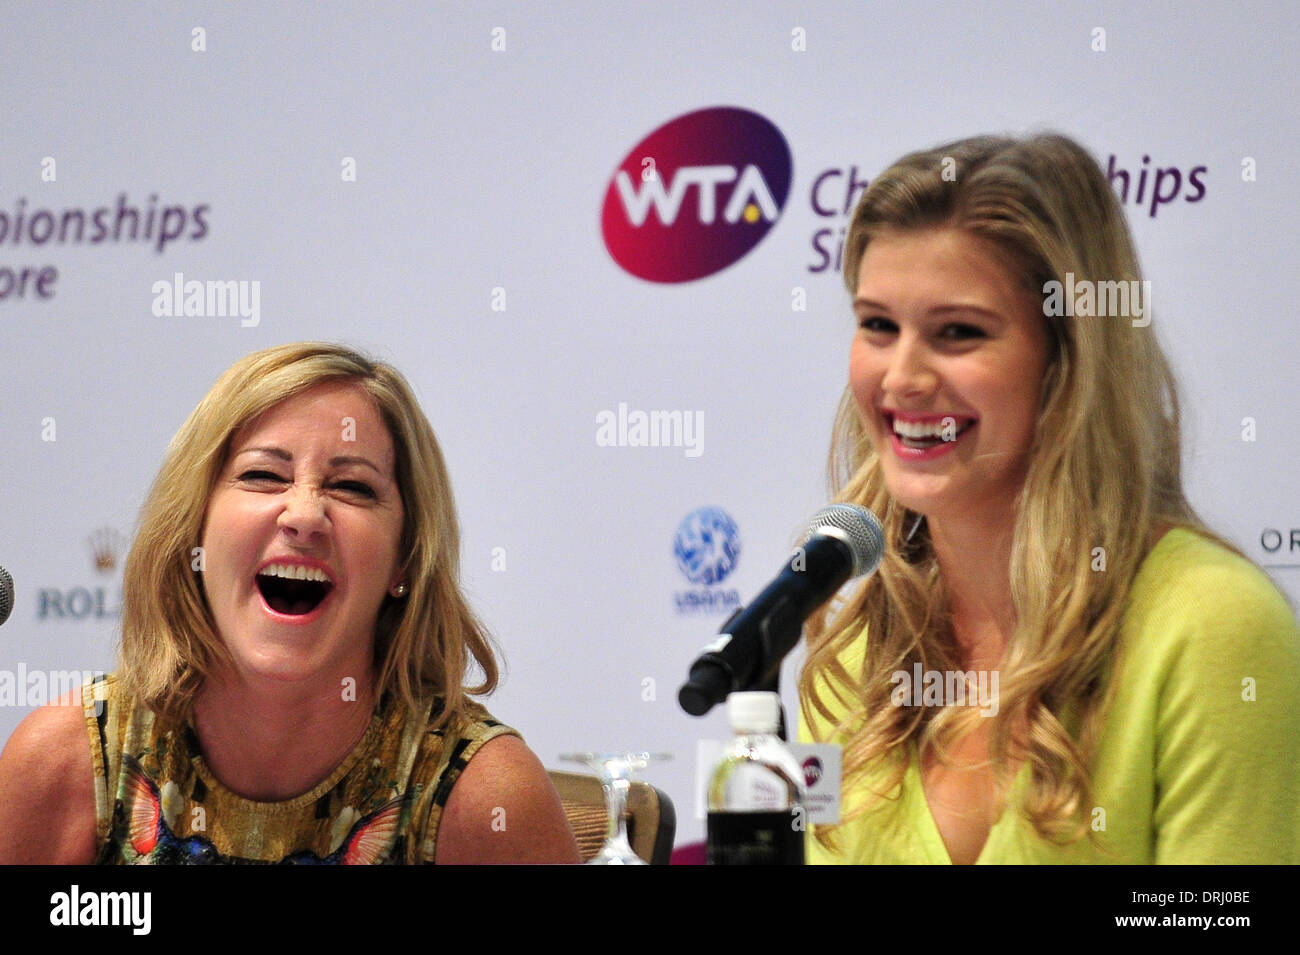 Singapore. 27th Jan, 2014. United States' tennis legend Chris Evert (L) and Eugenie Bouchard of Canada attend a press conference held at Singapore's ArtScience Museum, Jan. 27, 2014. WTA Championships held a press conference in Singapore on Monday. Credit: Then Chih Wey/Xinhua/Alamy Live News Stock Photo